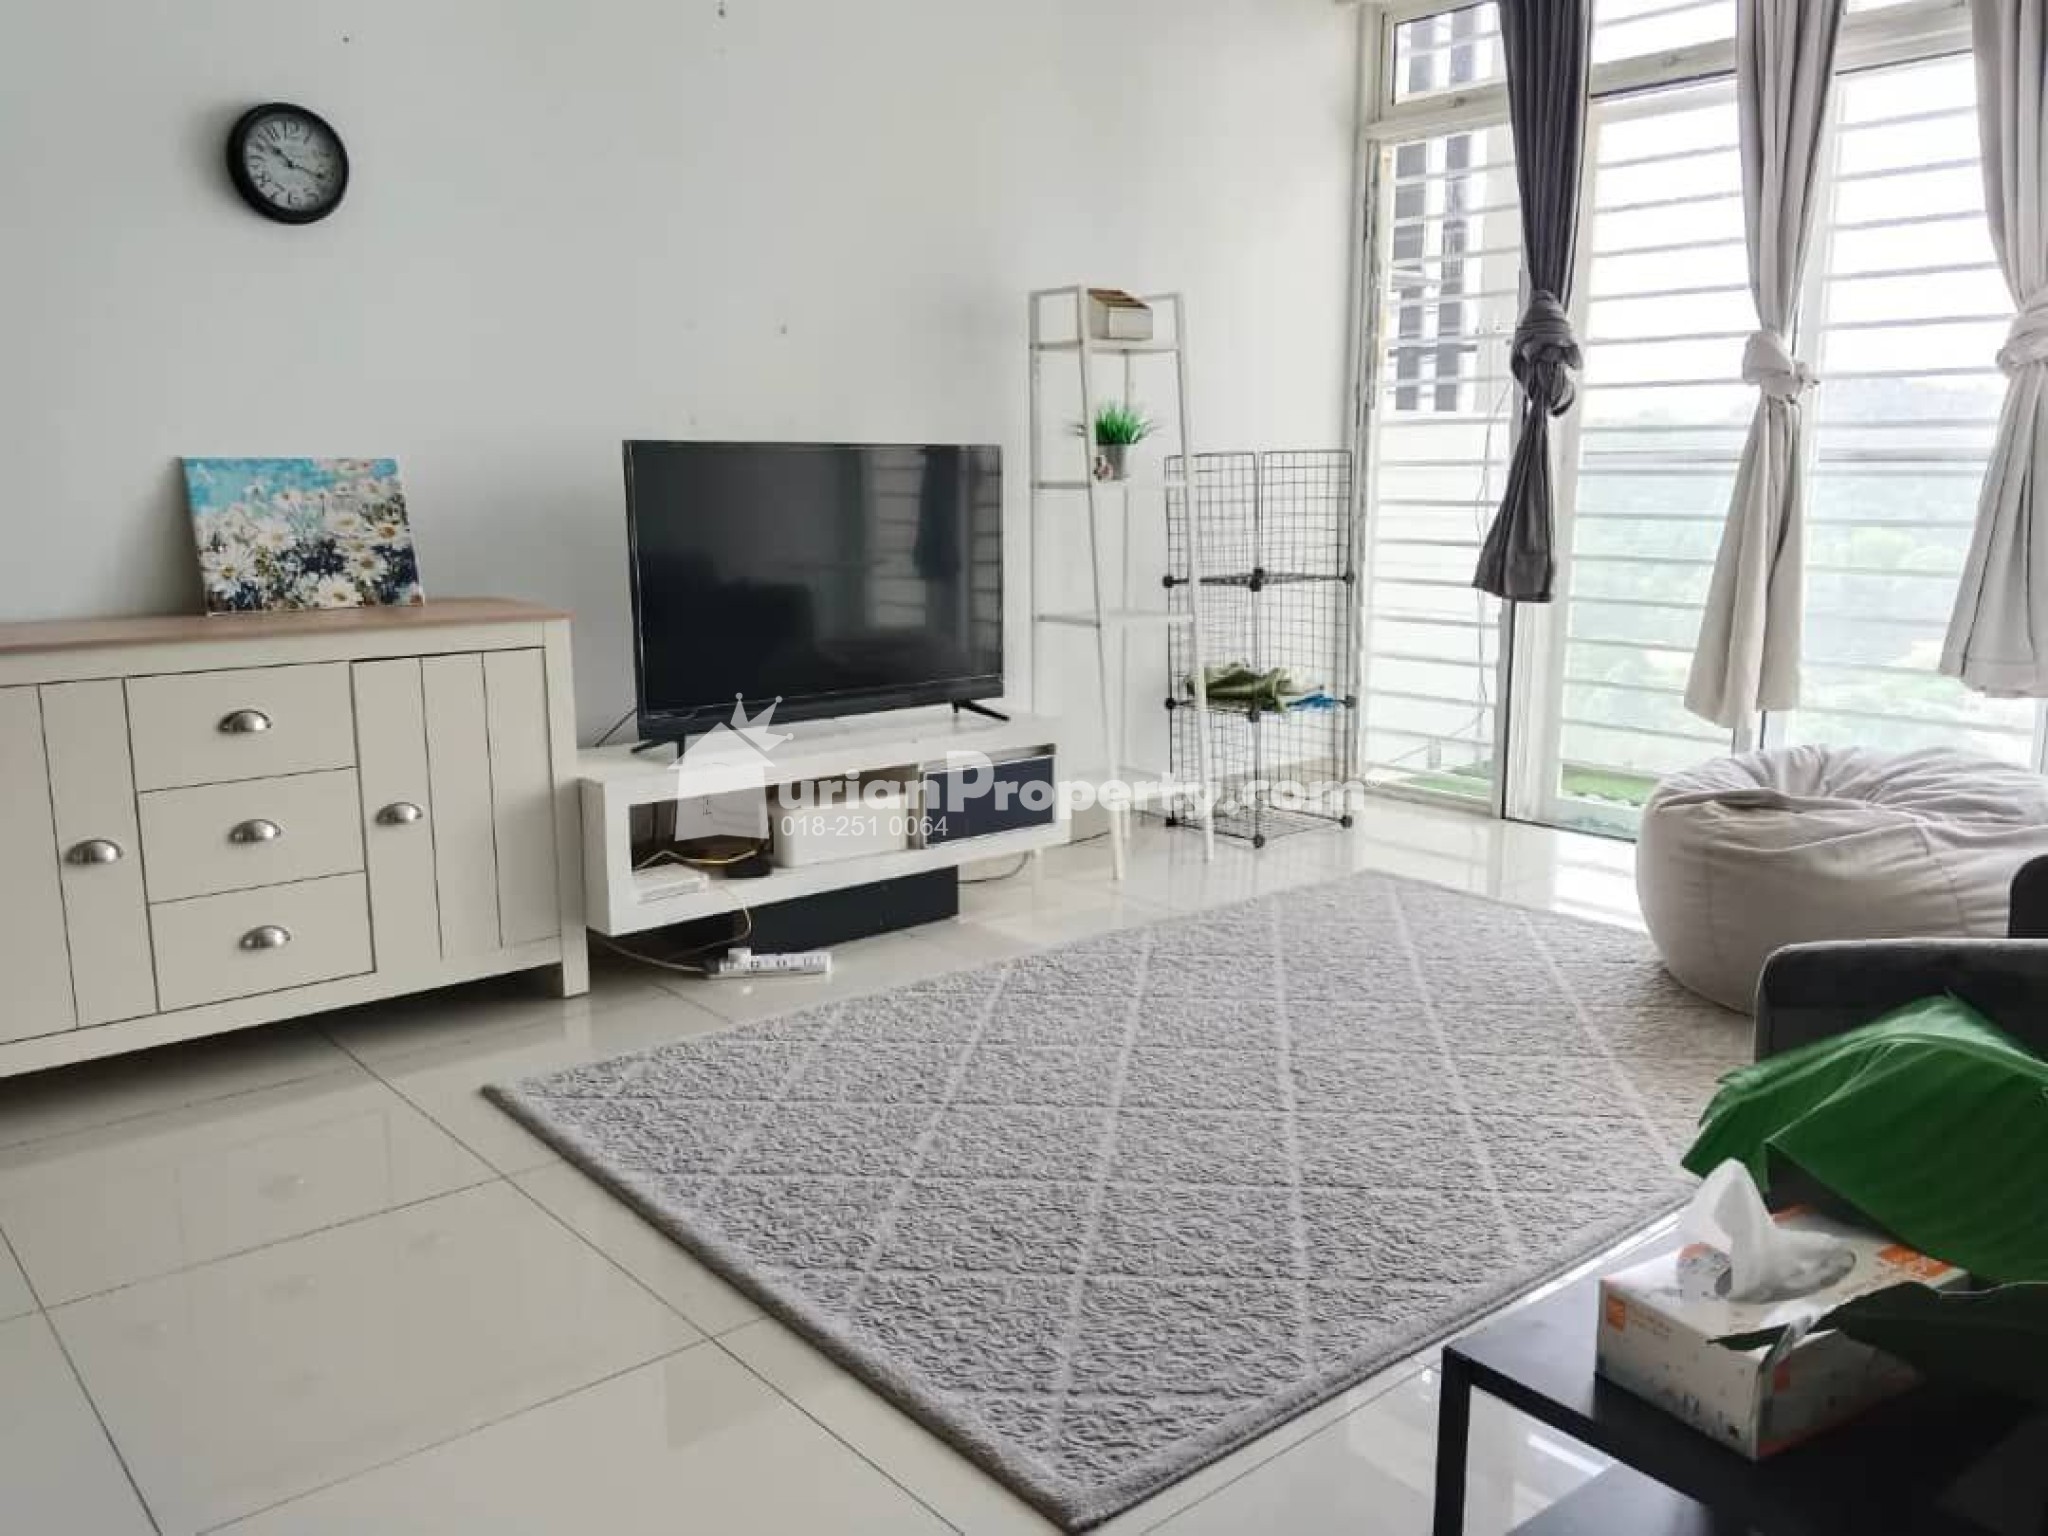 Condo For Rent at Dwiputra Residences